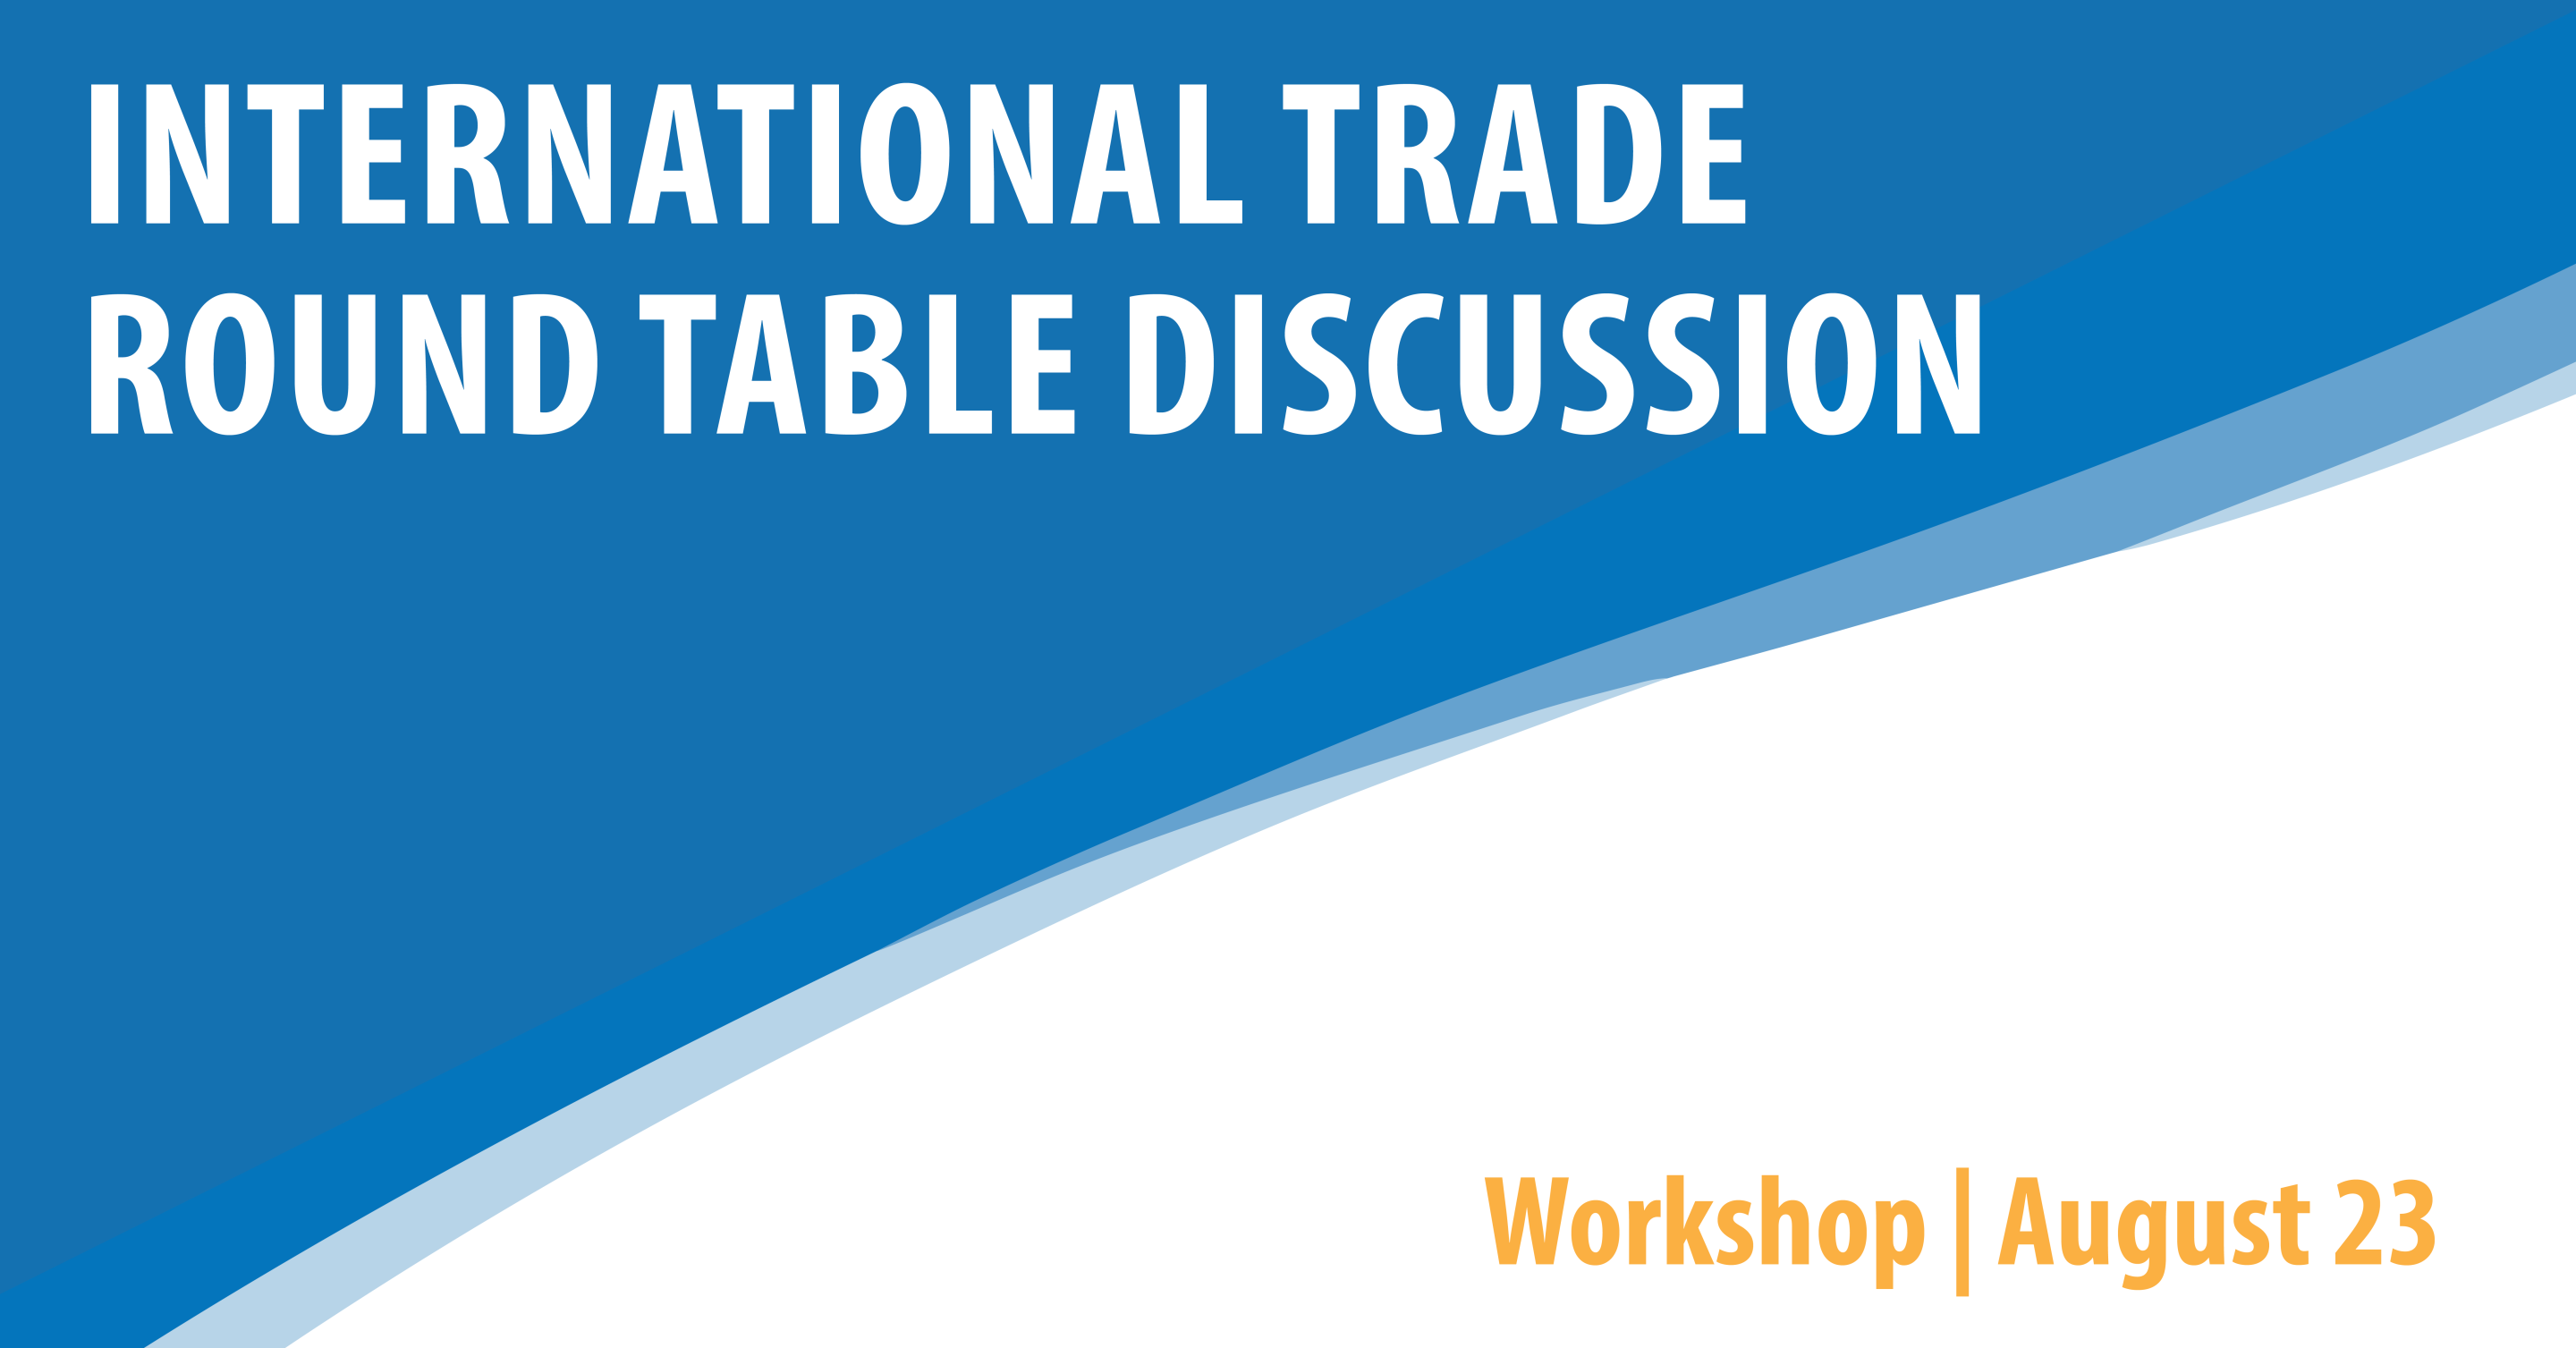 International Trade Round Table Discussion - Cheyenne